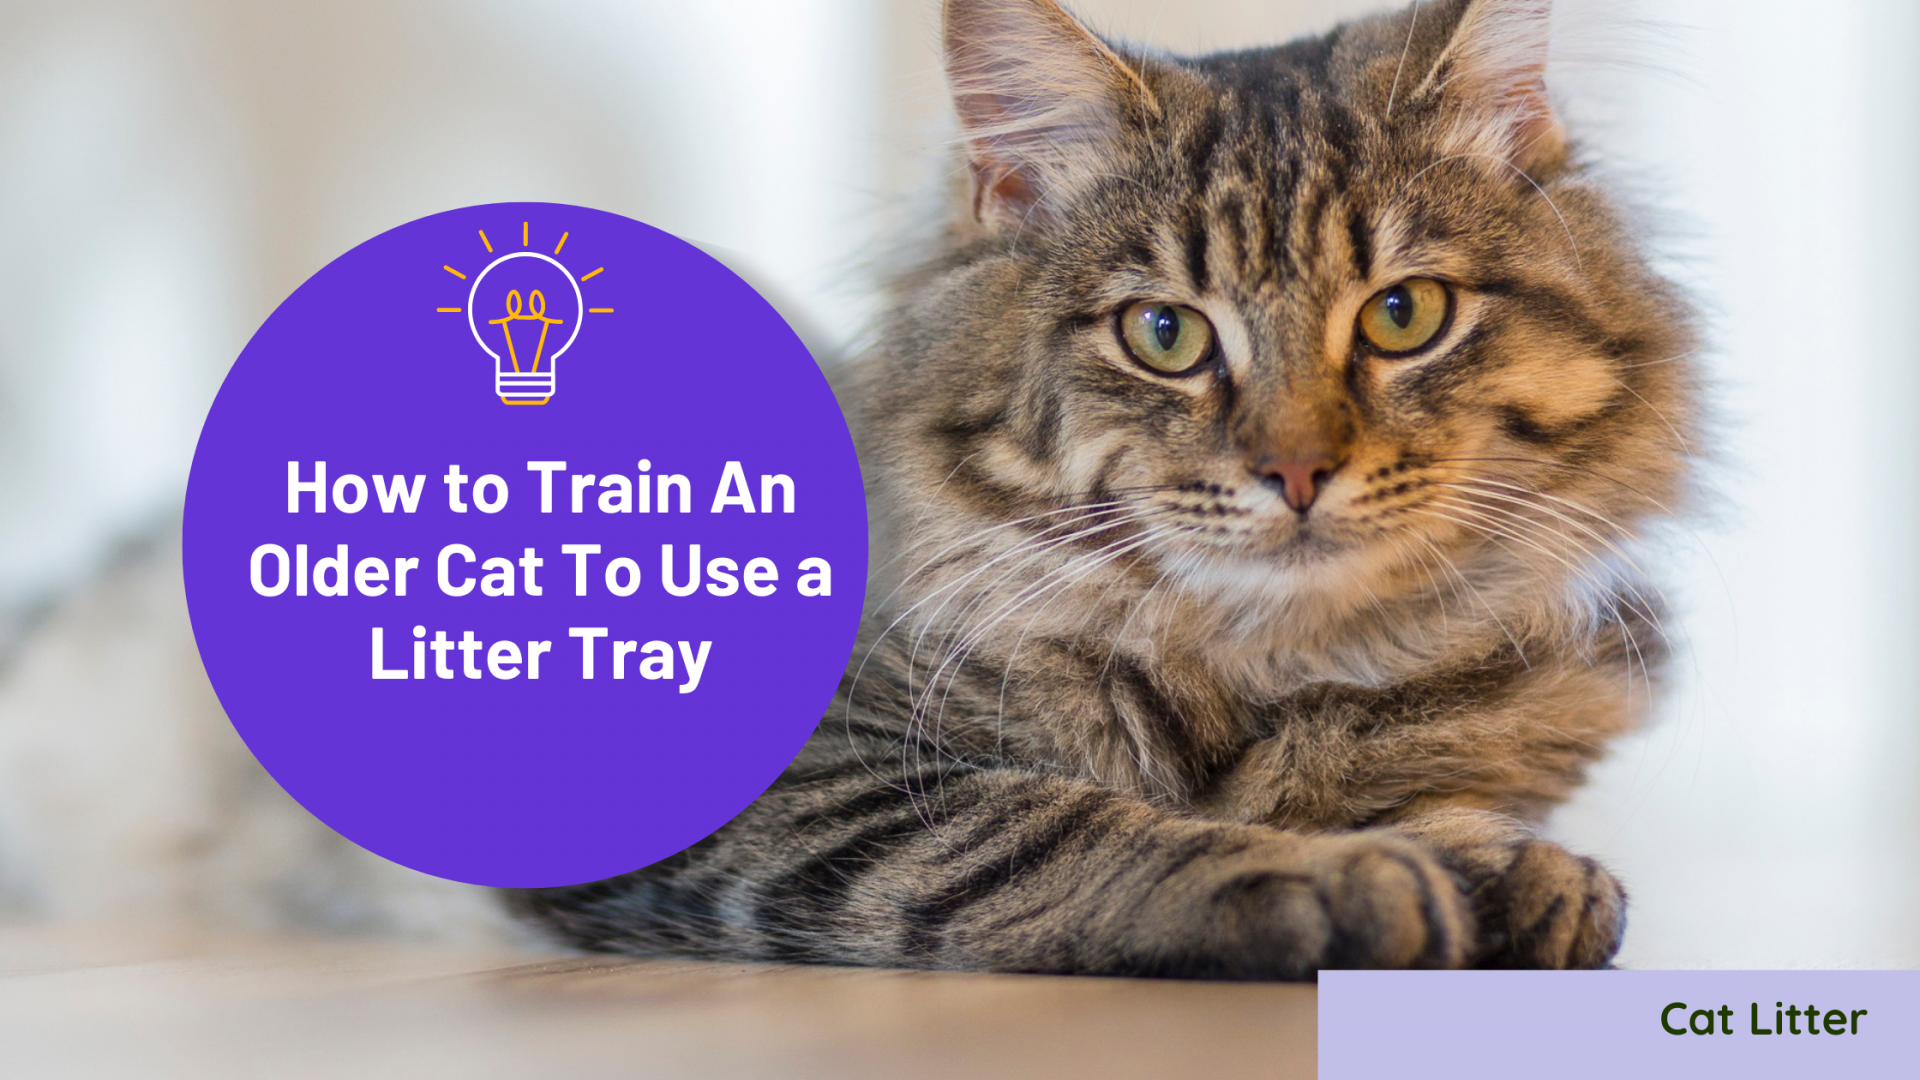 How to Train An Older Cat To Use a Litter Tray